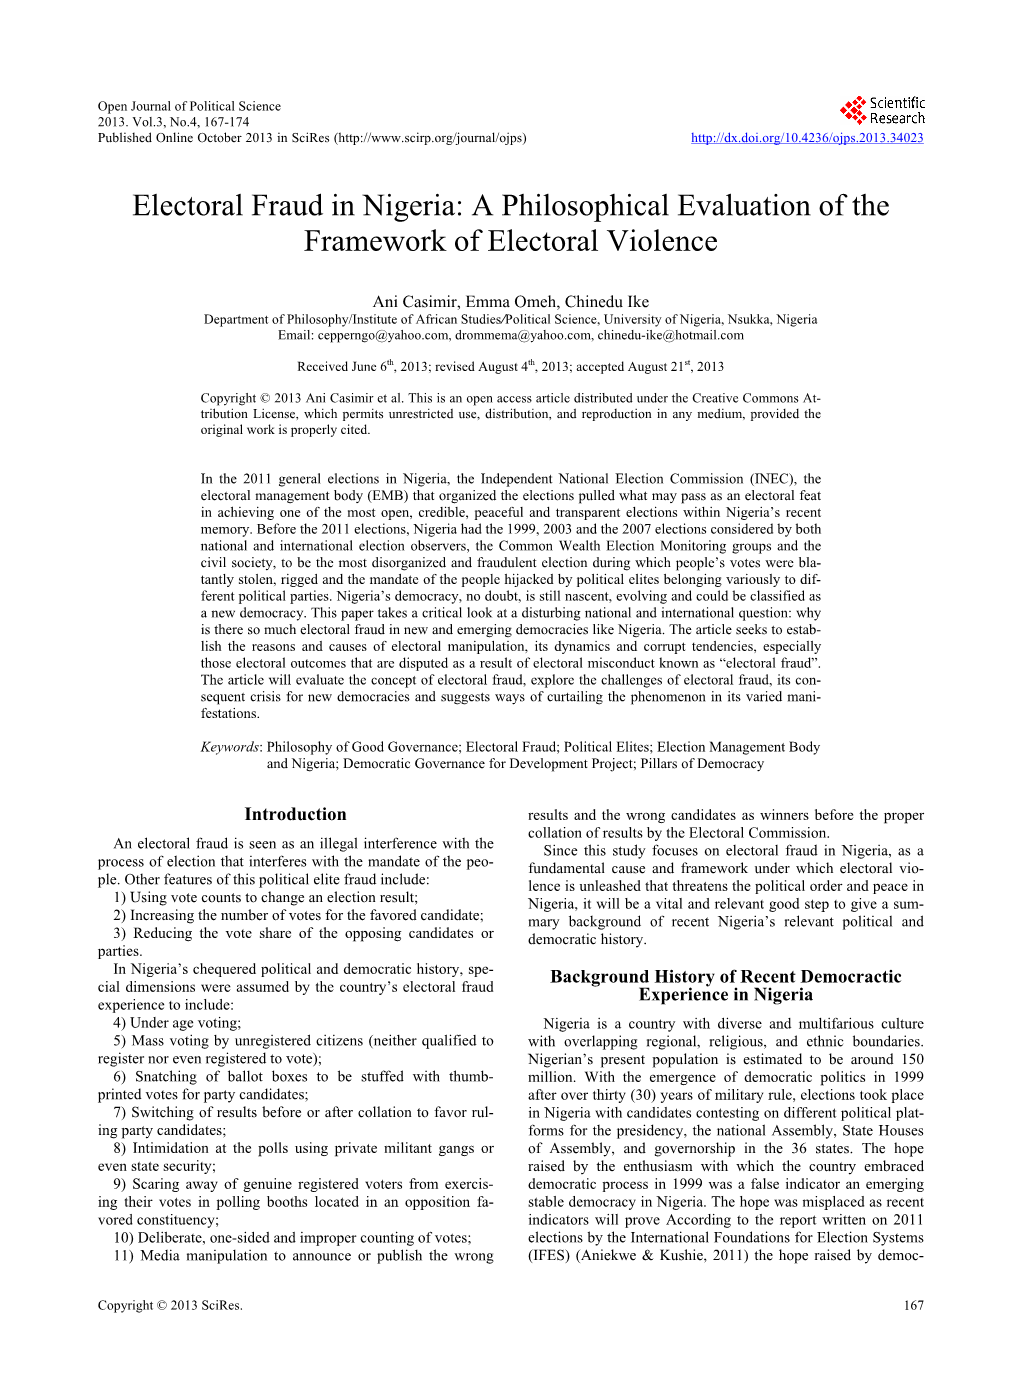 Electoral Fraud in Nigeria: a Philosophical Evaluation of the Framework of Electoral Violence